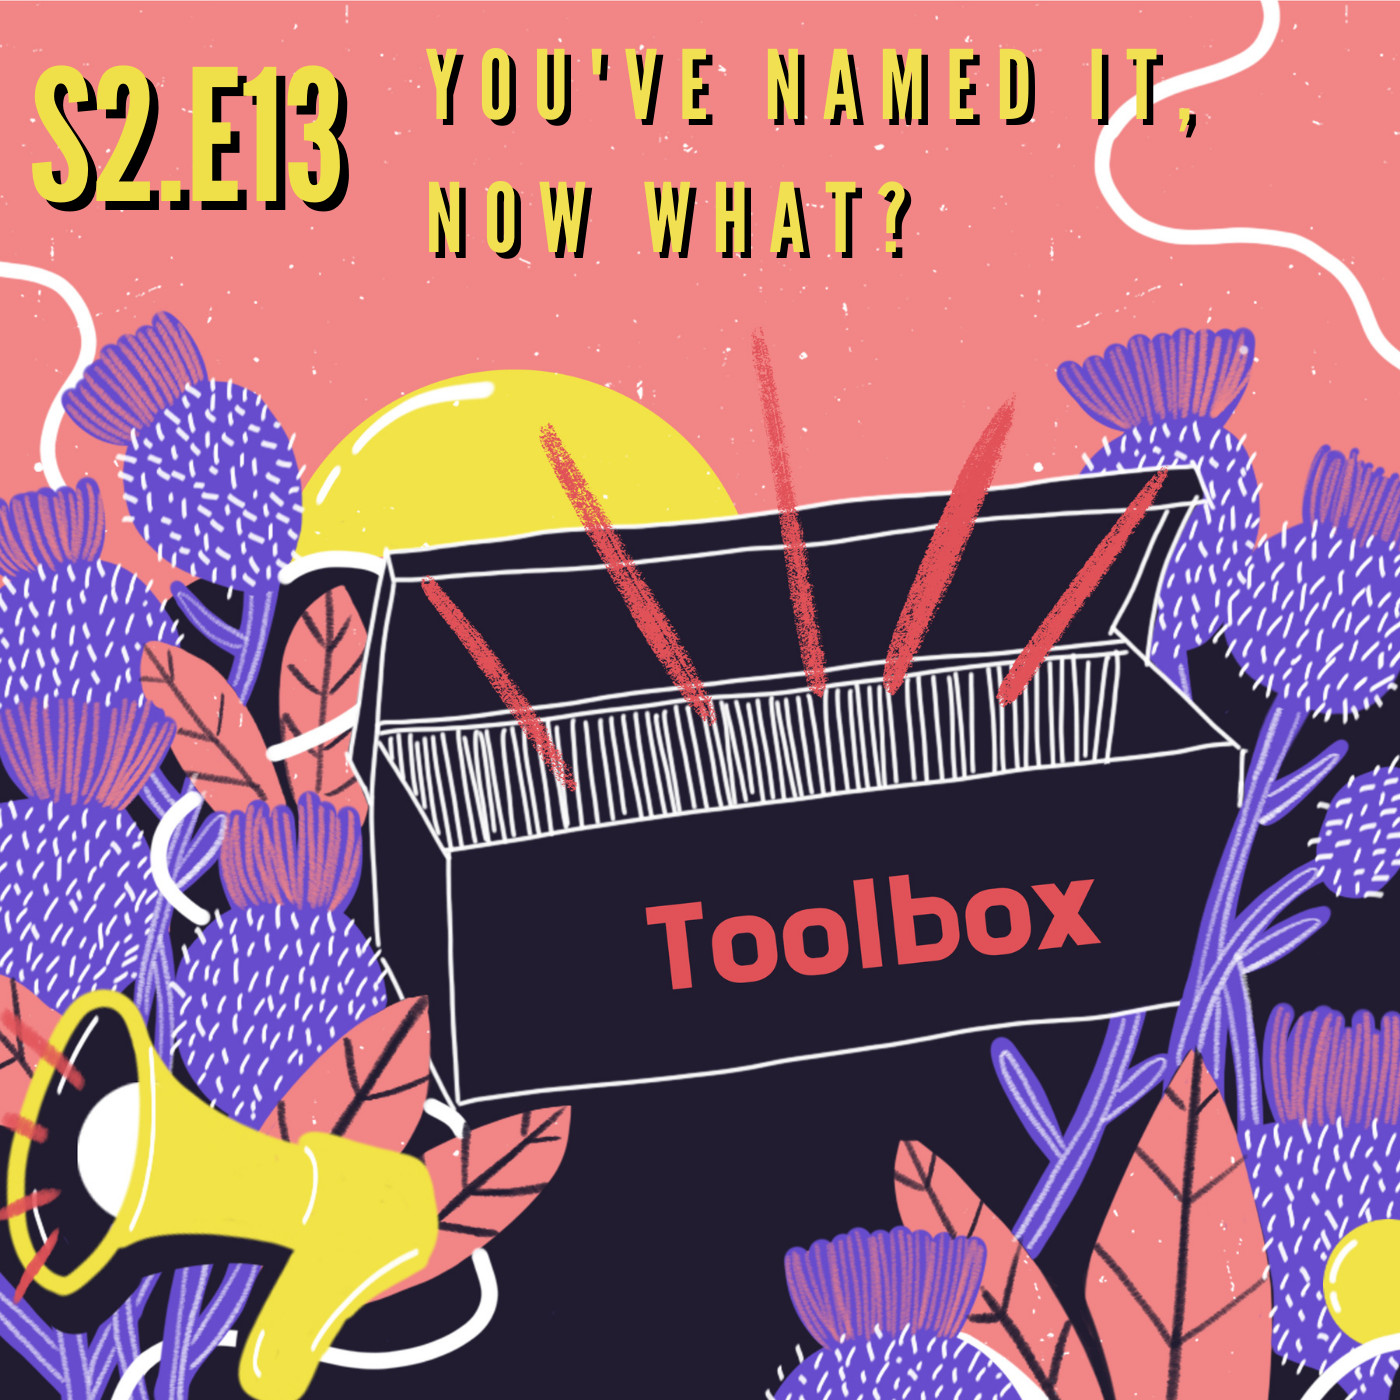 Toolbox: You’ve named it, now what?